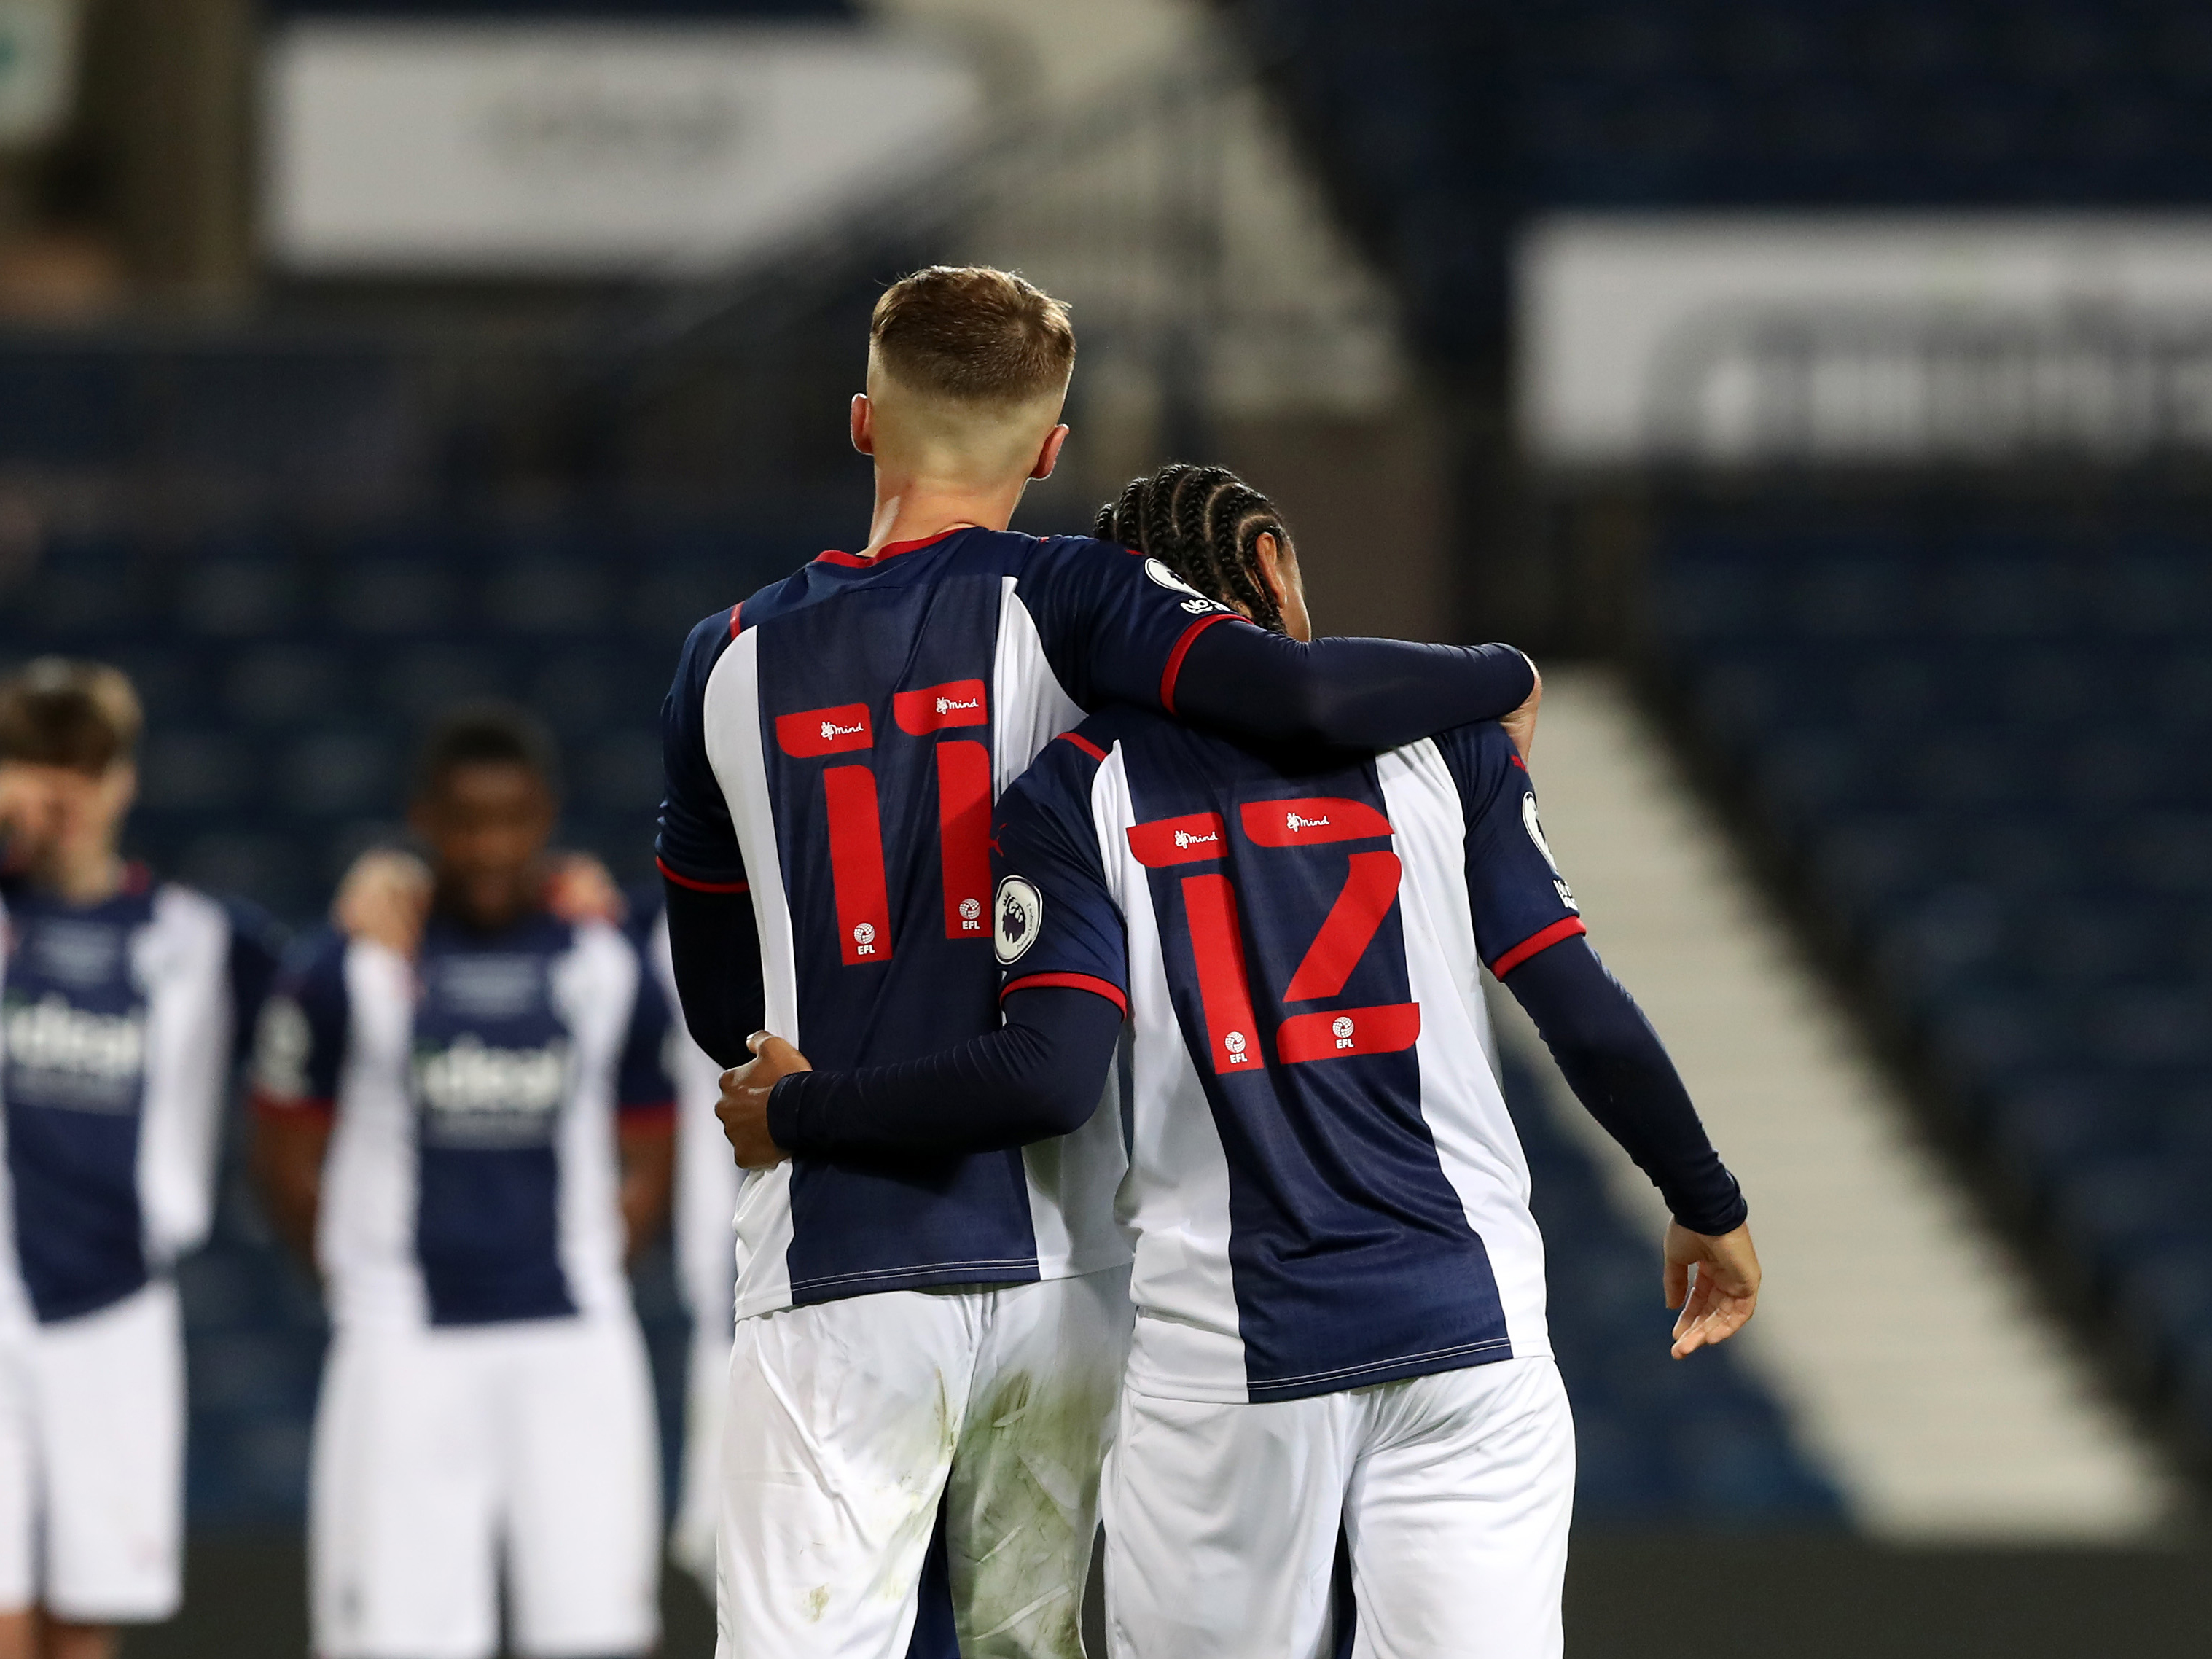 Albion’s PL2 team have confirmed their pre-season schedule ahead of the 2022/23 campaign